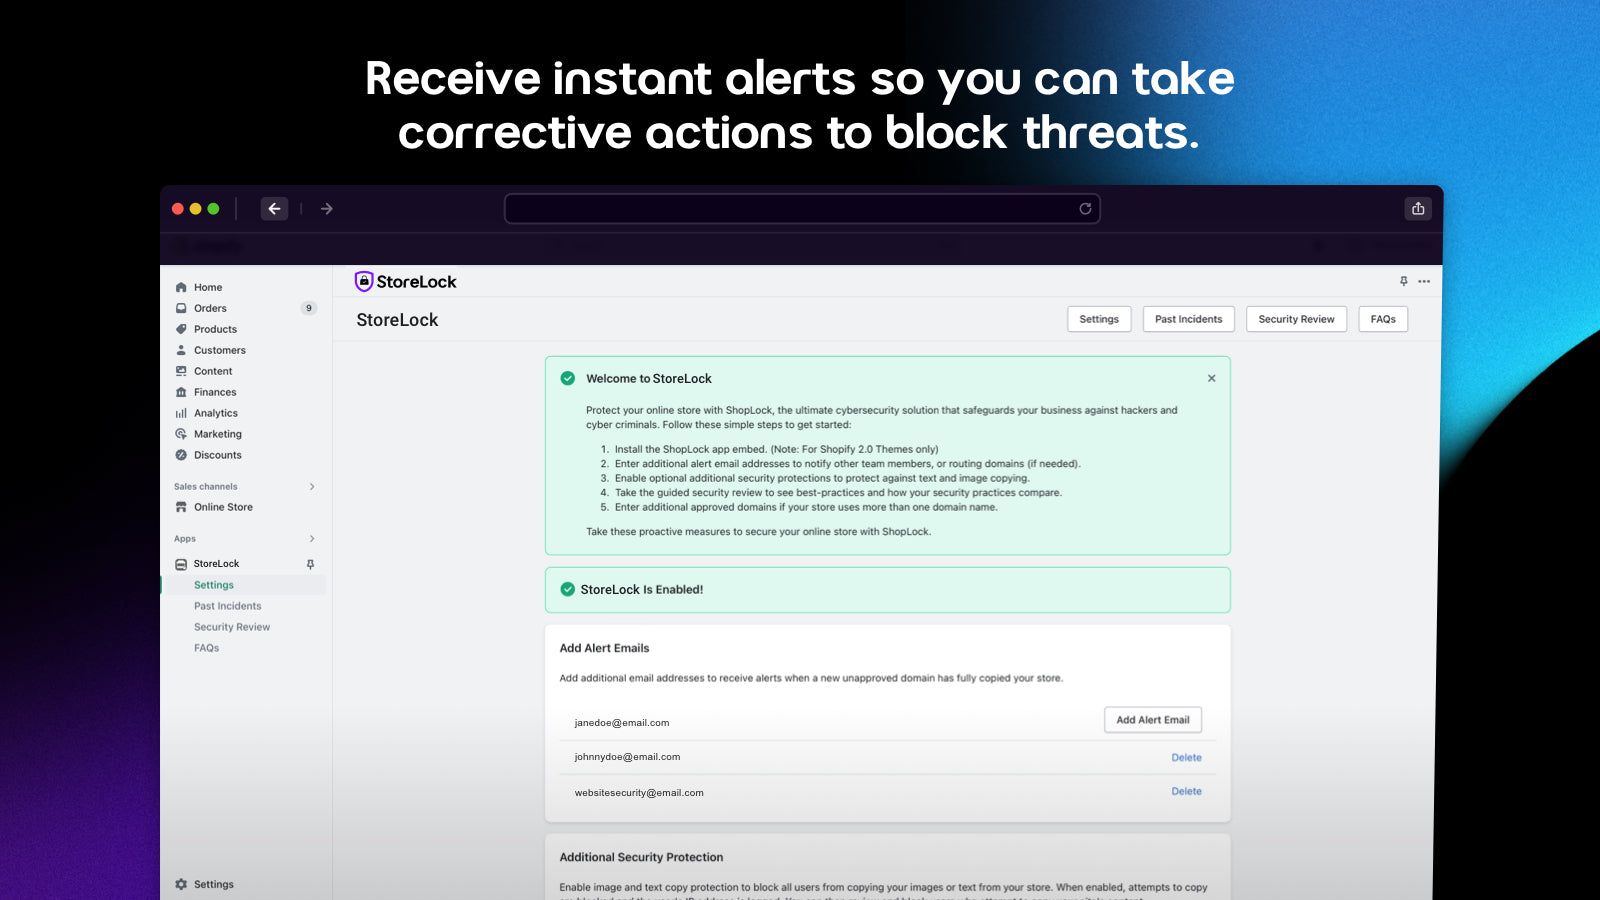 Receive instant alerts so you can block harmful threats.